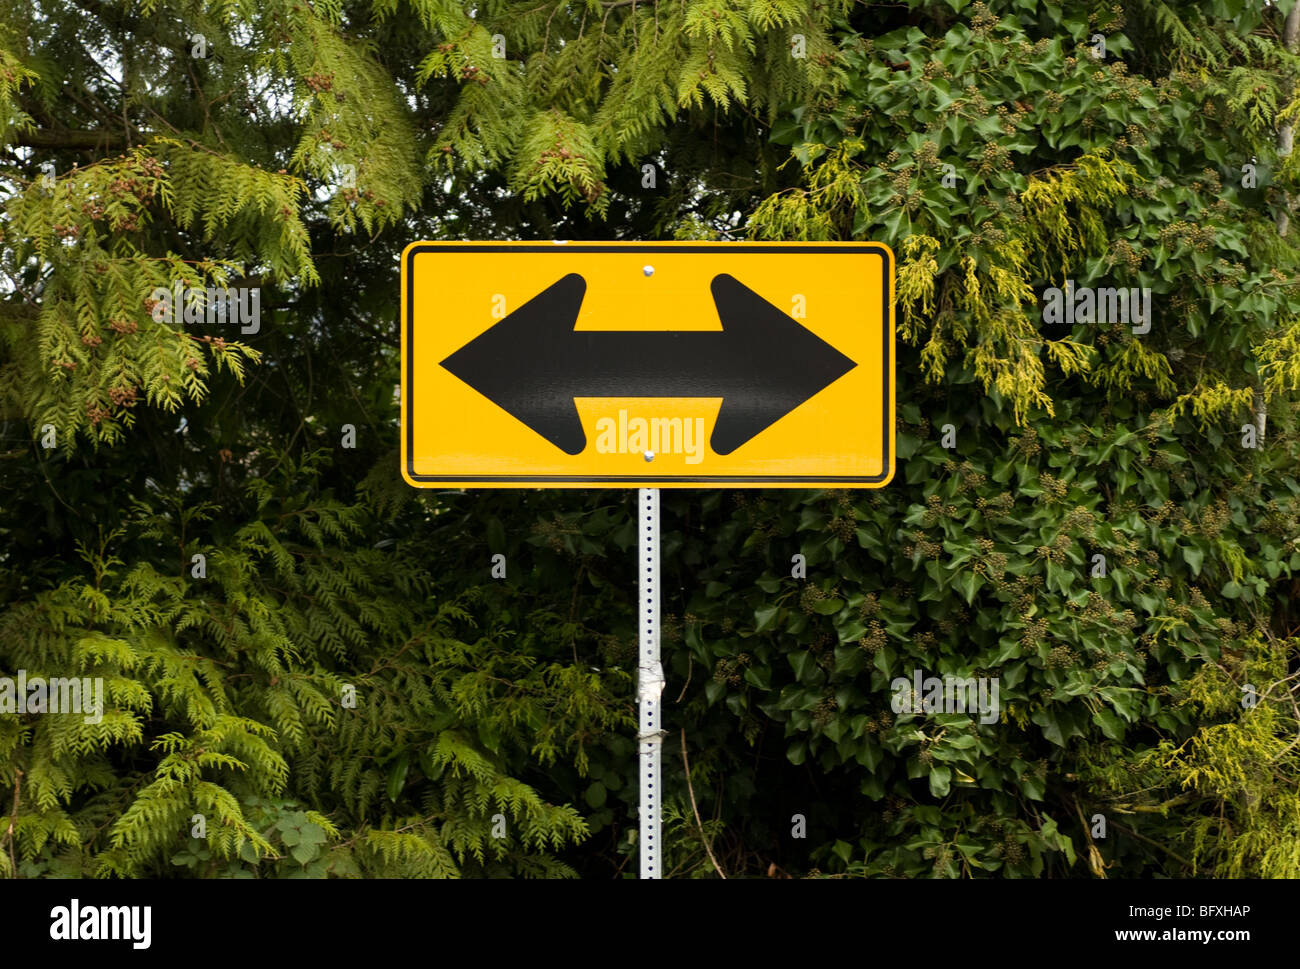 Two way arrow traffic sign Stock Photo